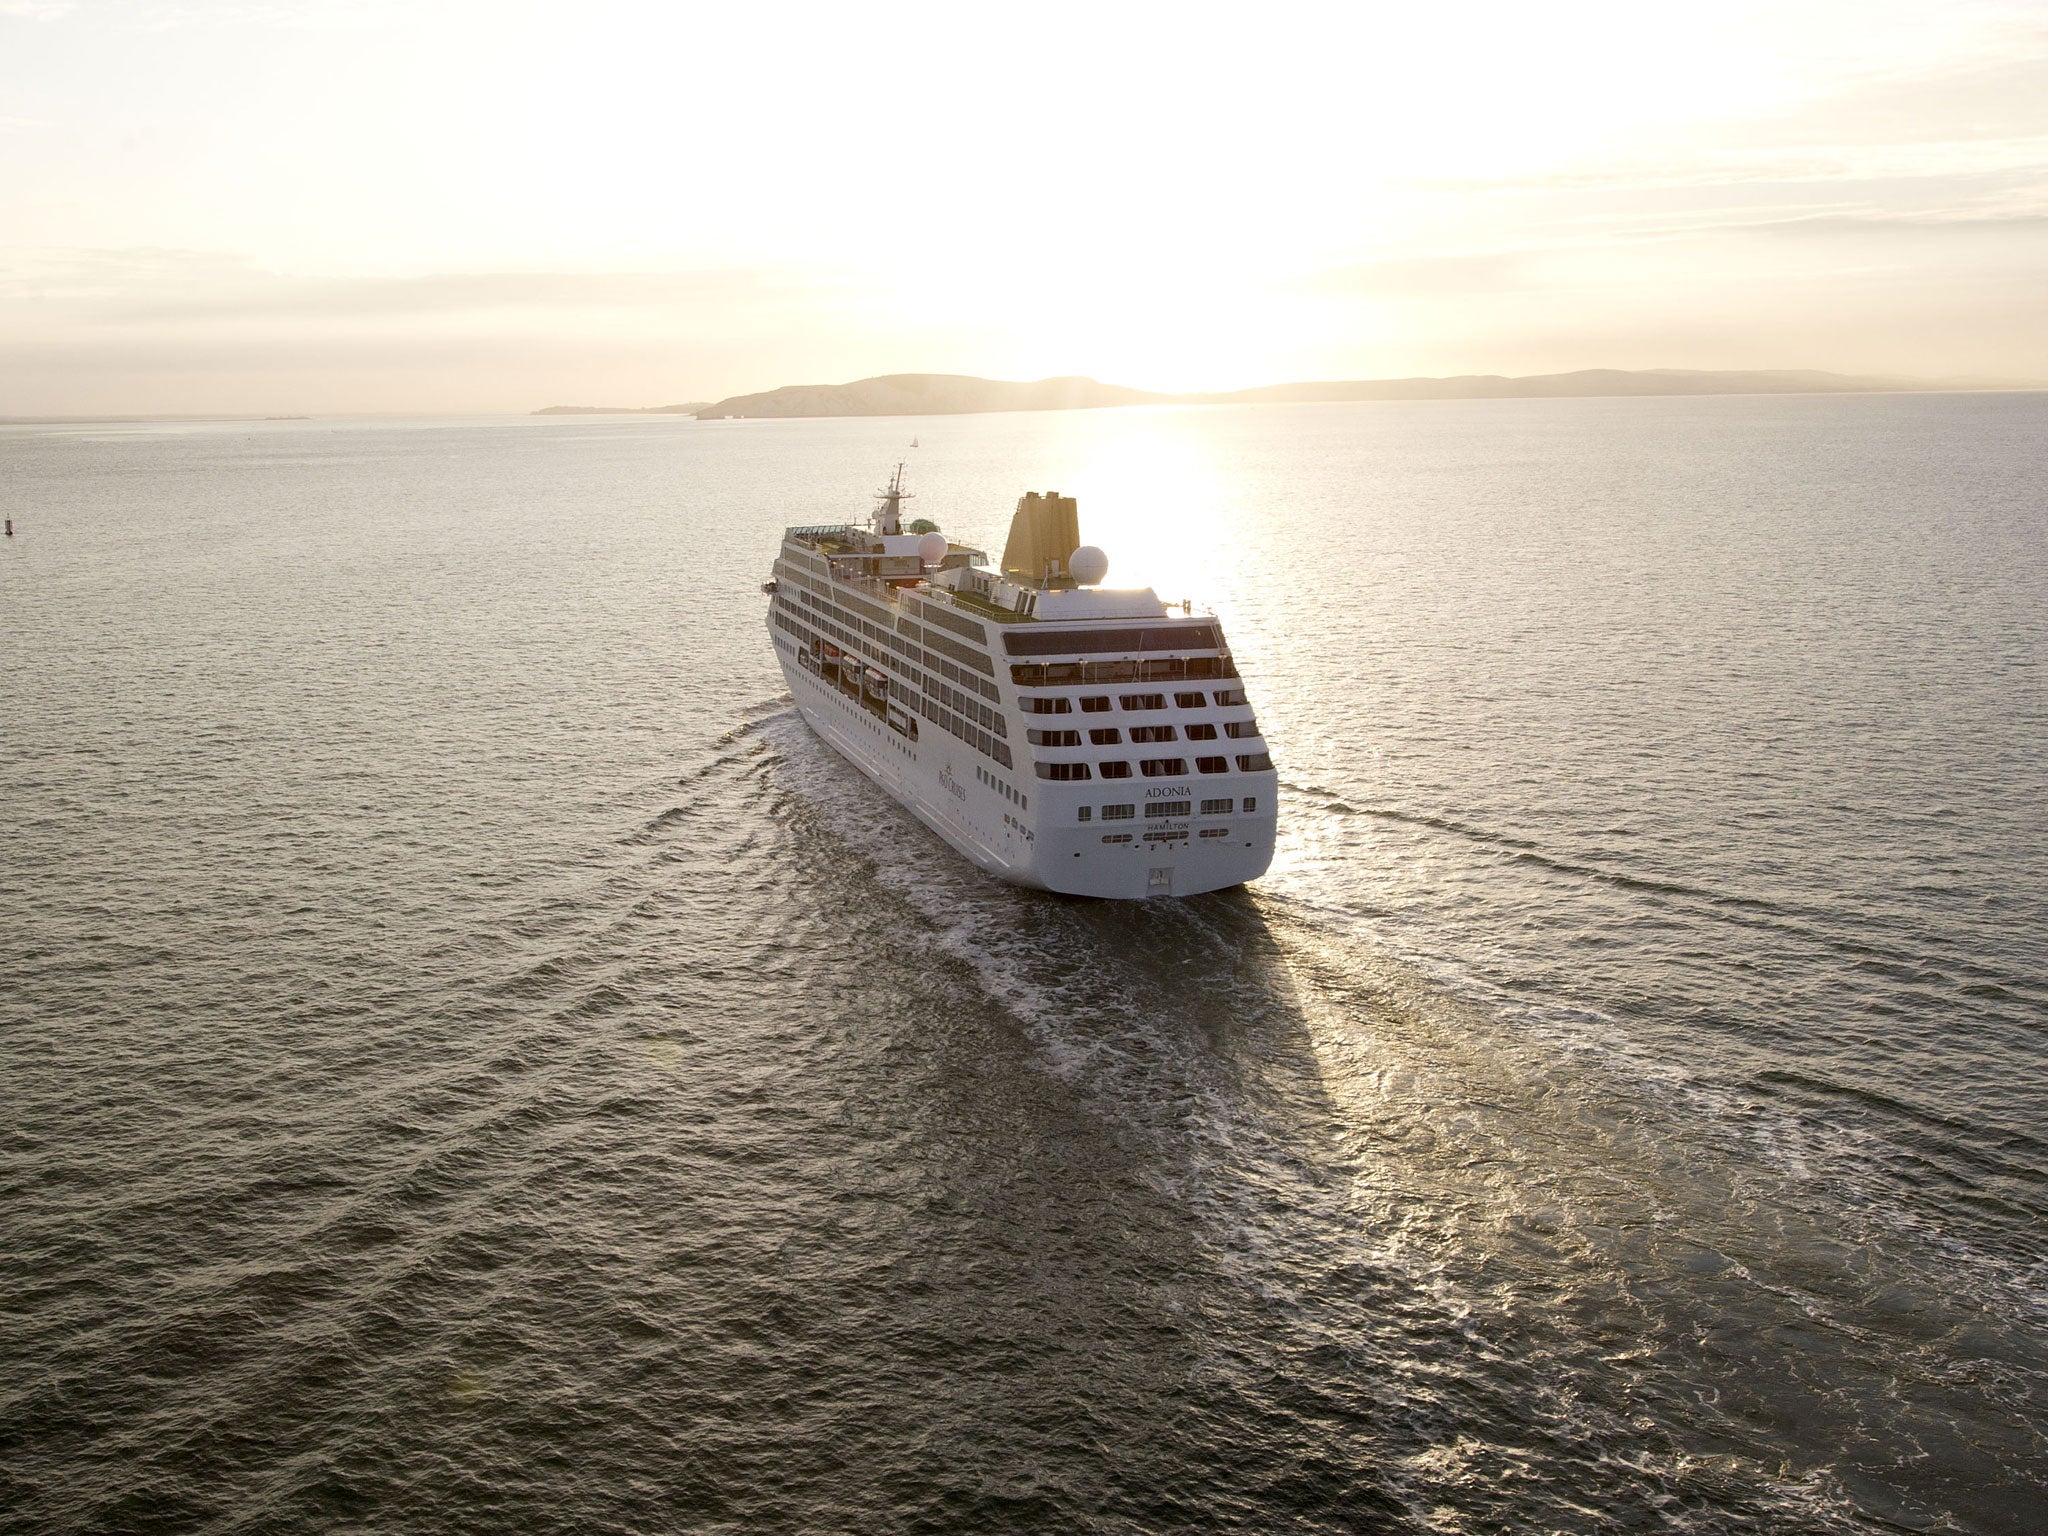 No kidding: P&O’s Adonia is a haven at sea, for adults only